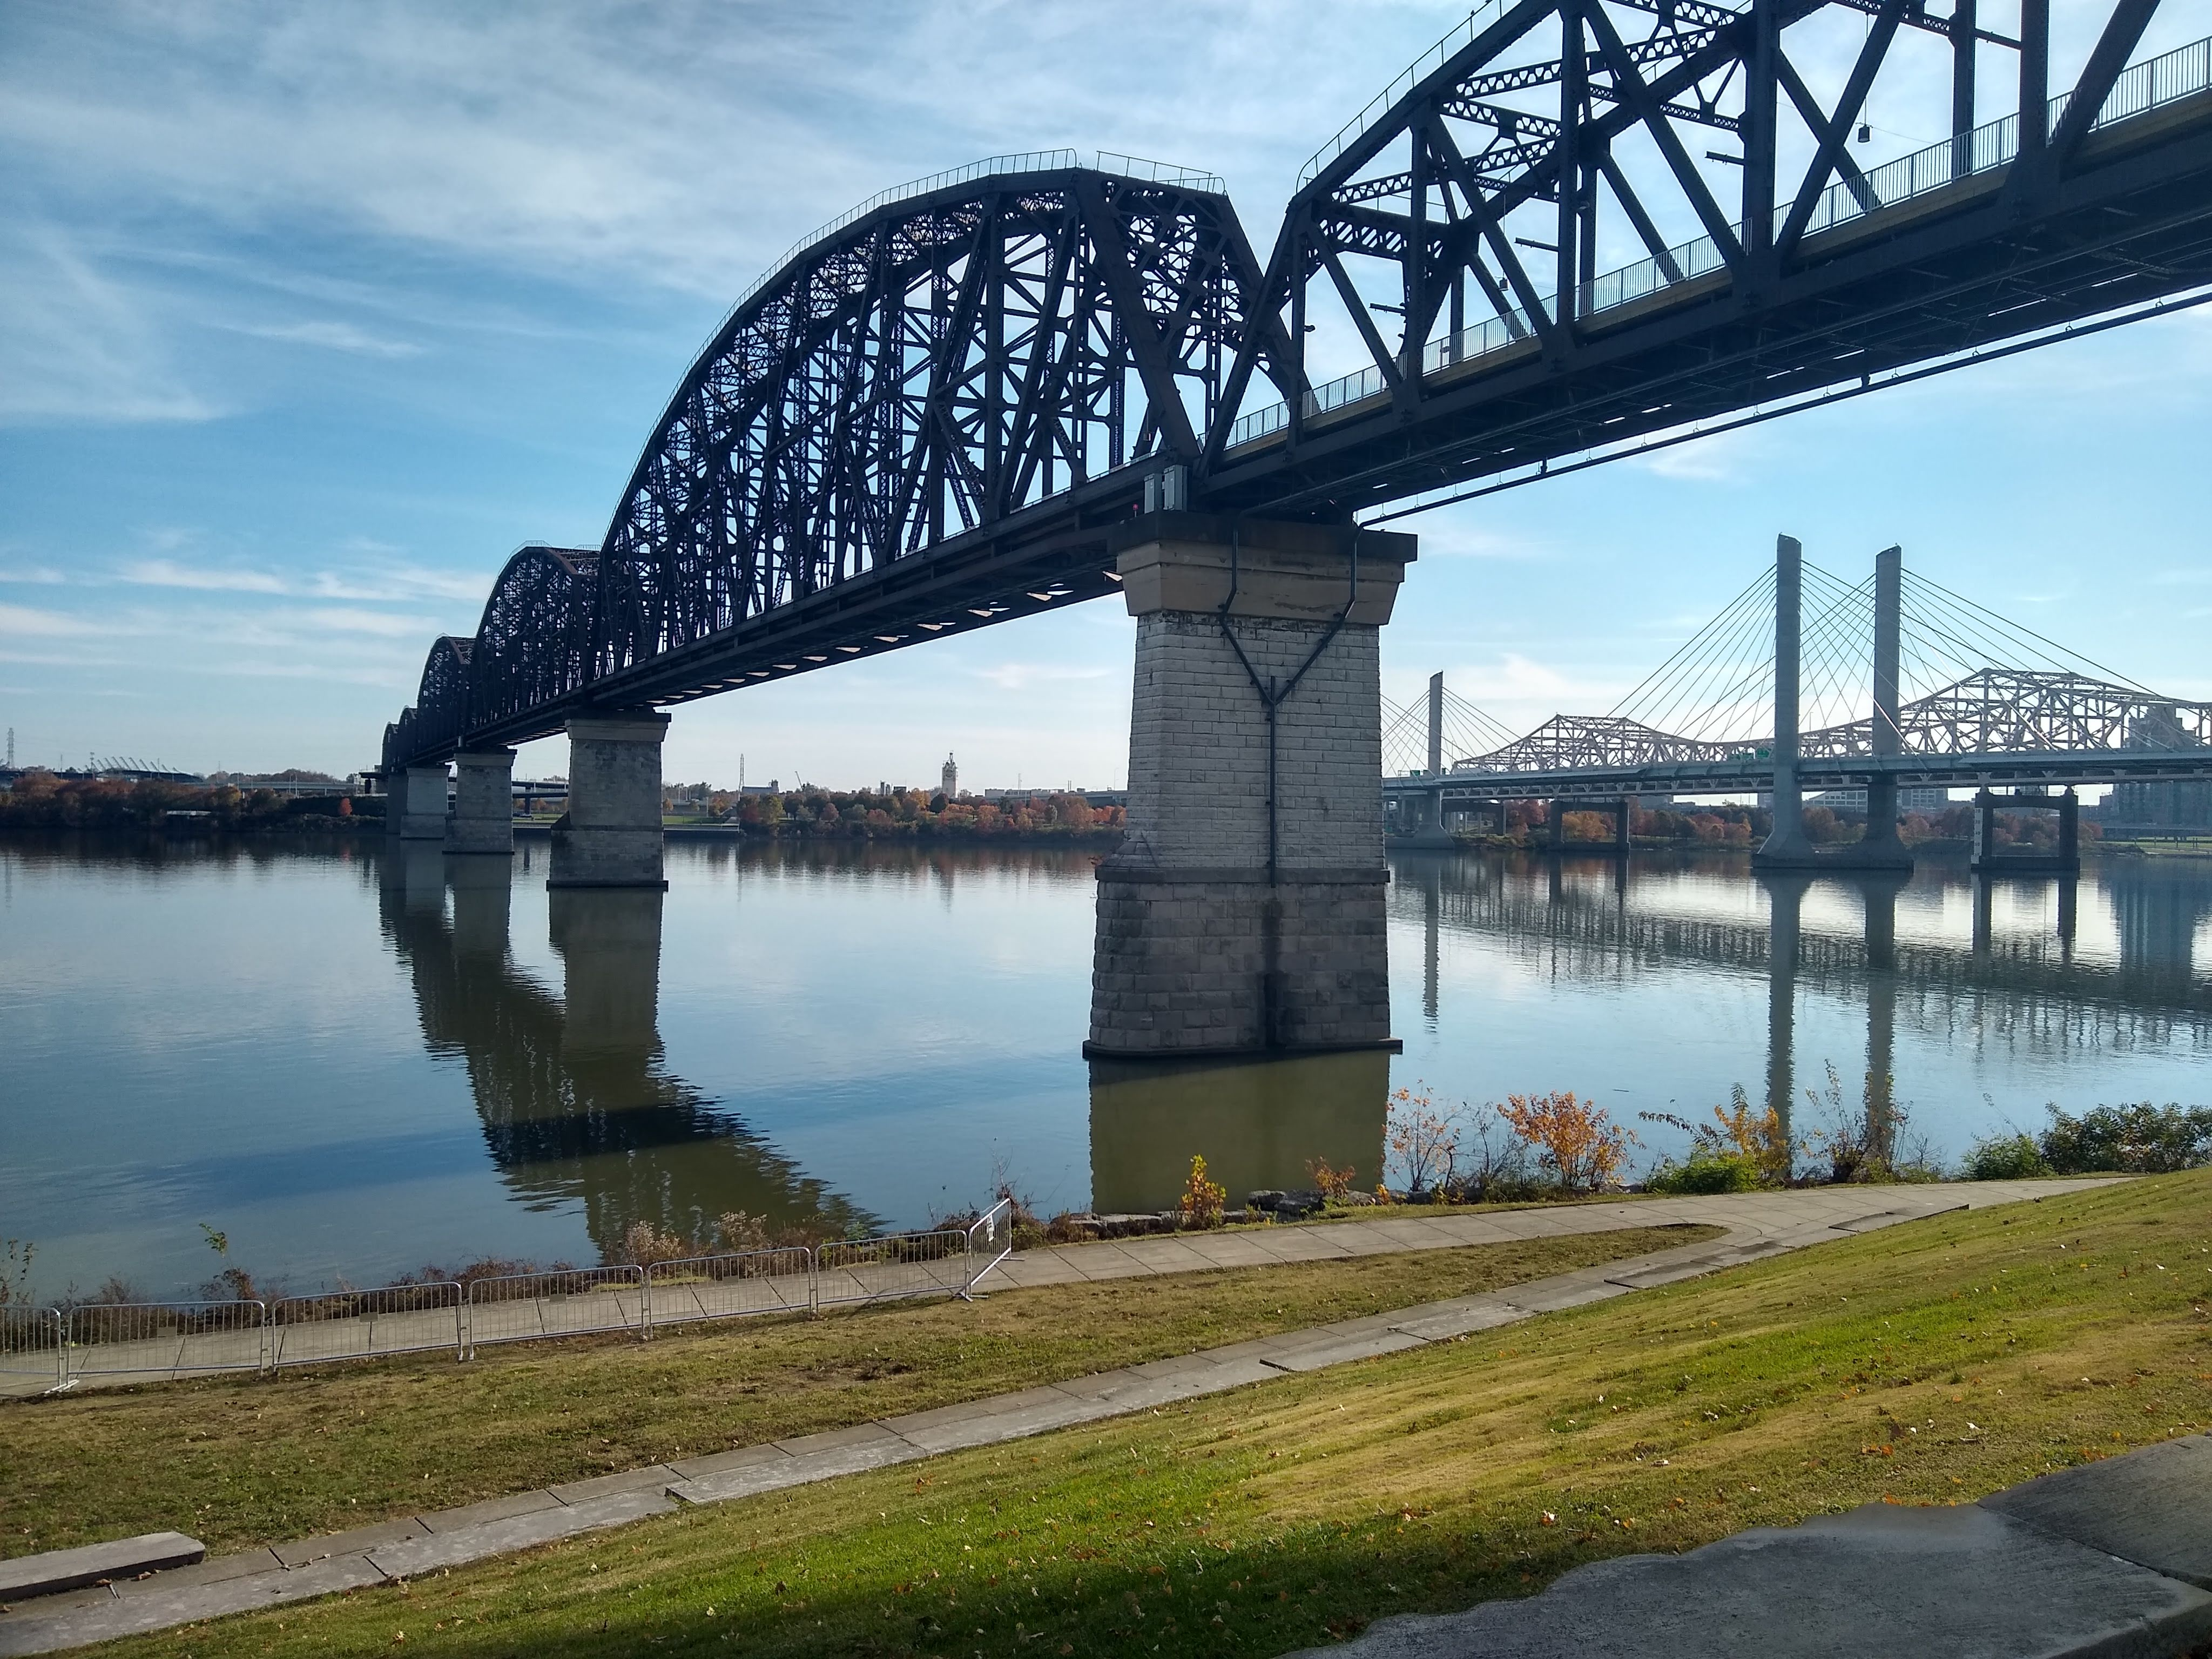 From Van Dyke Park in Jeffersonville, IN, a low-angle shot with the Big Four Pedestrian Bridge in the foreground, and Abraham Lincoln & John F. Kennedy Memorial bridges in the background.